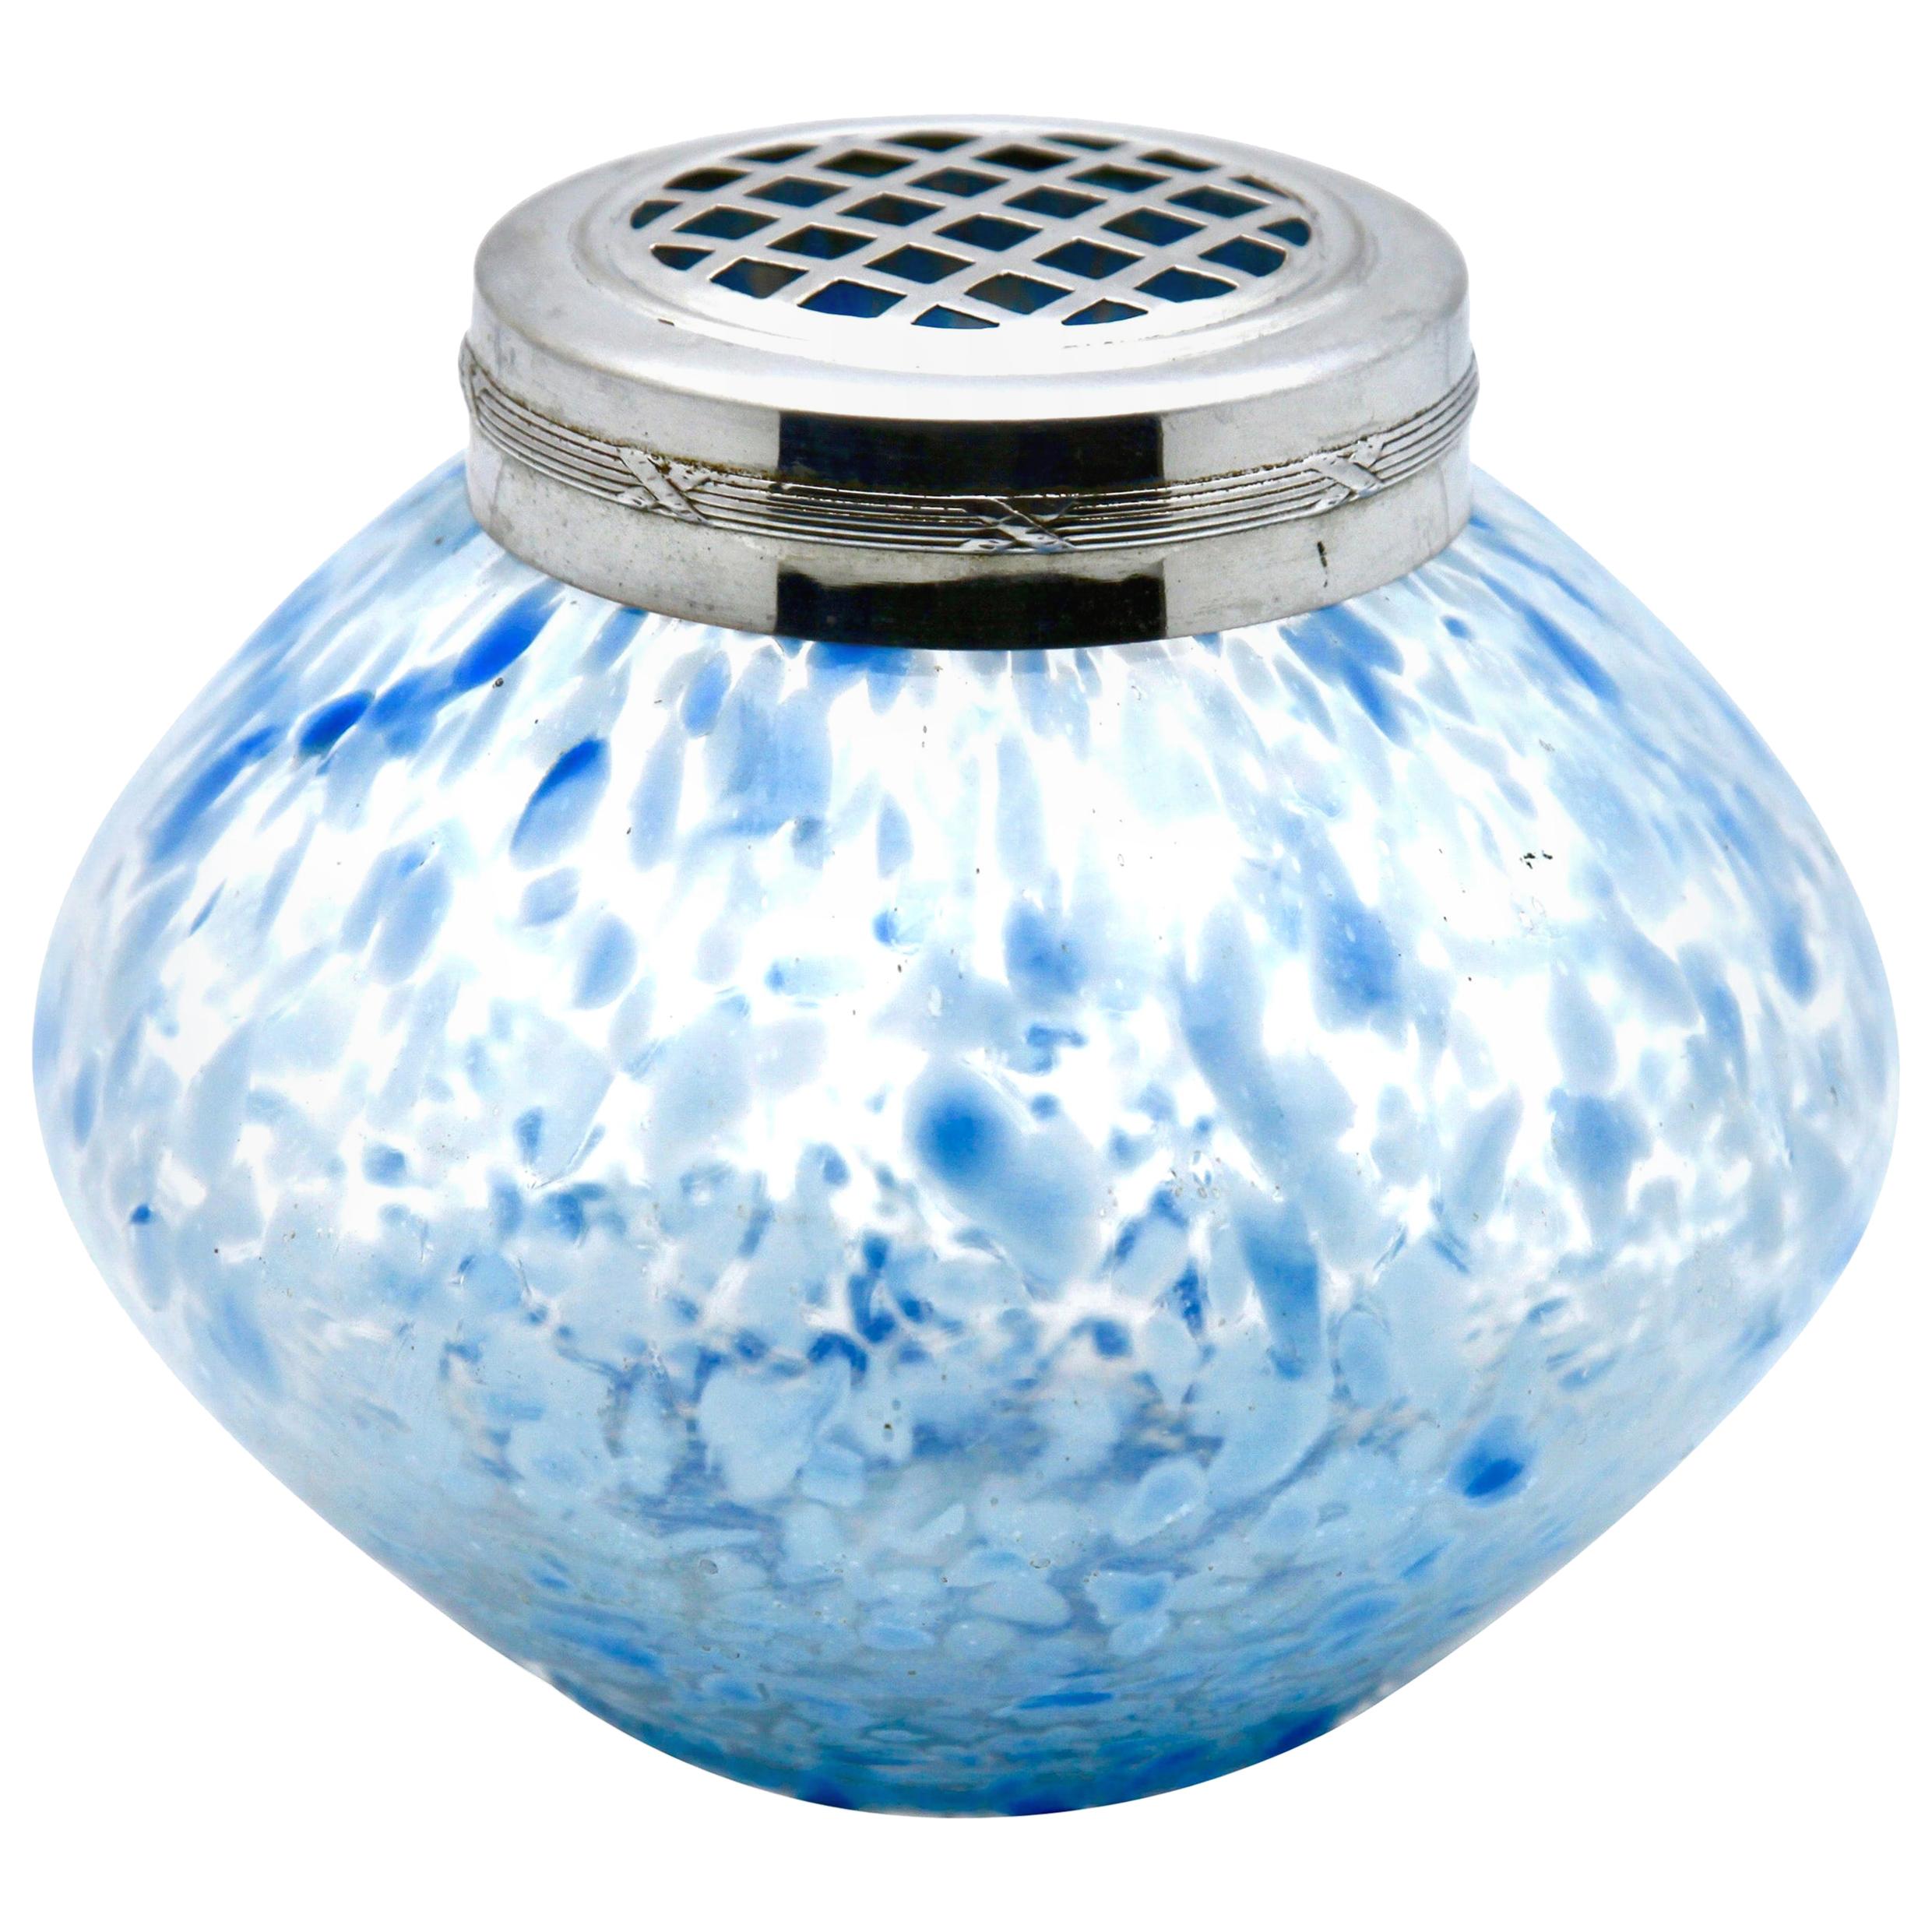 Bohemian 'Pique Fleurs' Vase with Grille, Flecked with Blue, Late 1930s For Sale